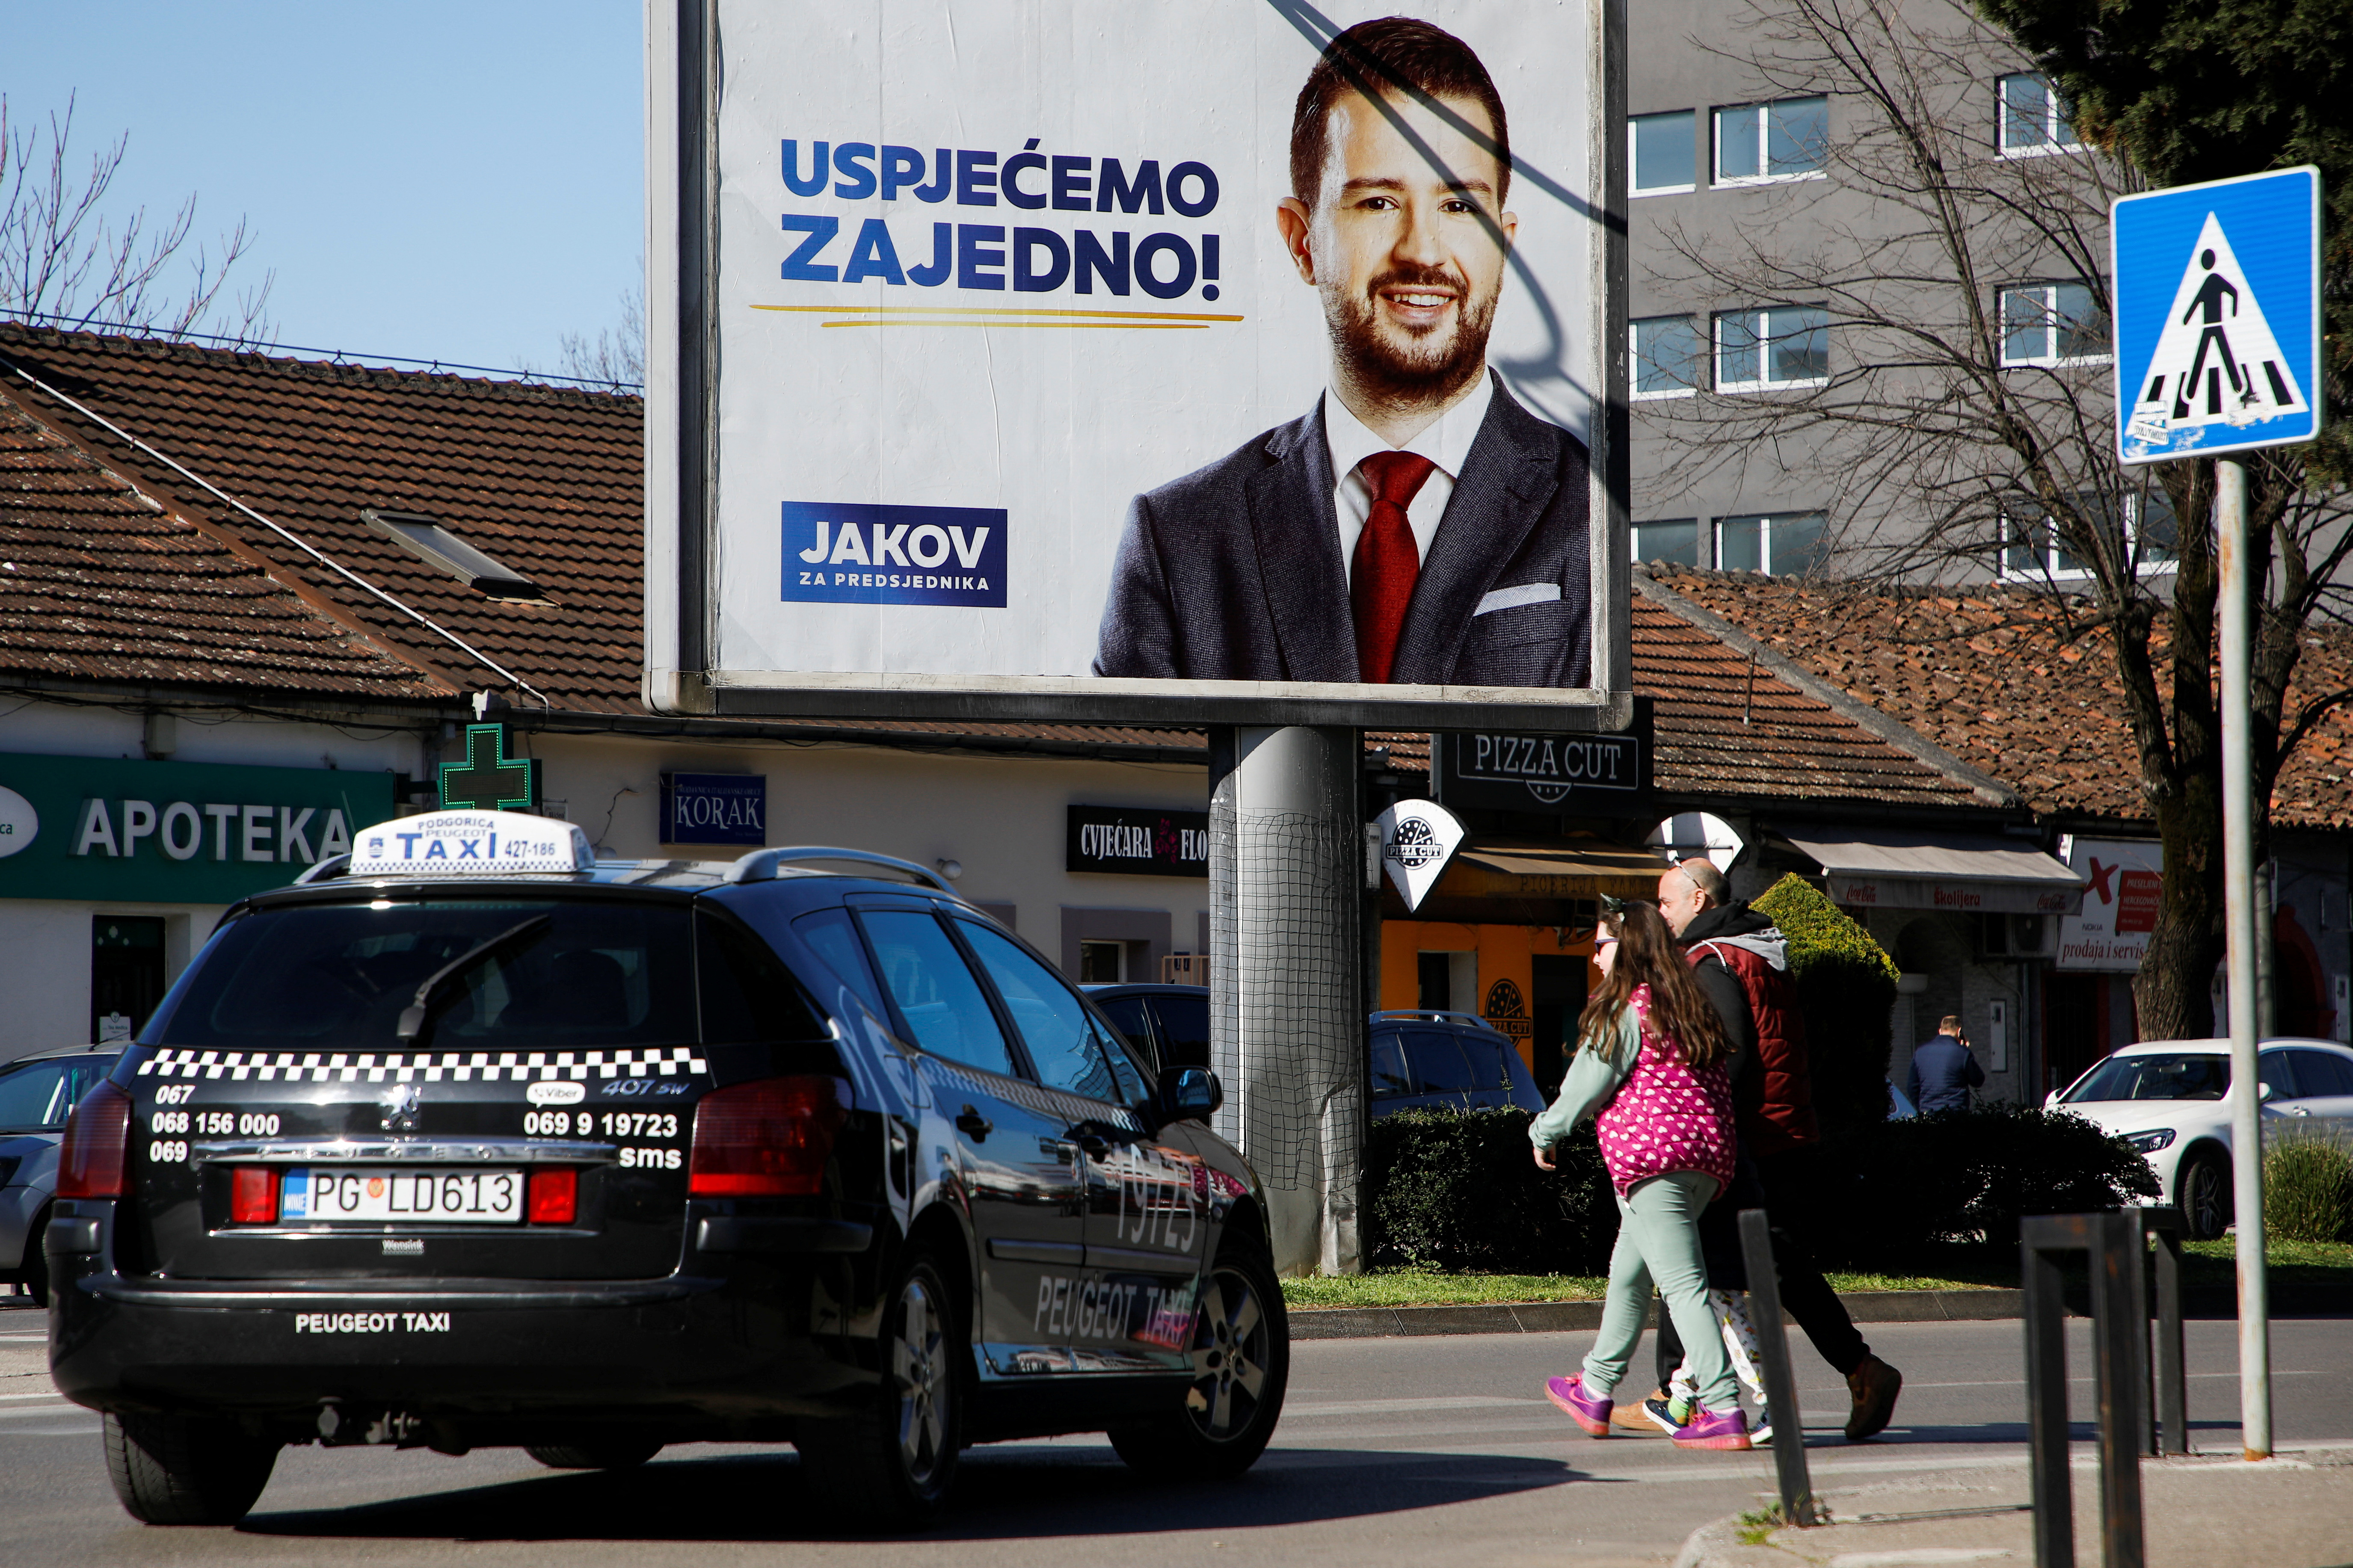 Montenegro prepares for second round of presidential election